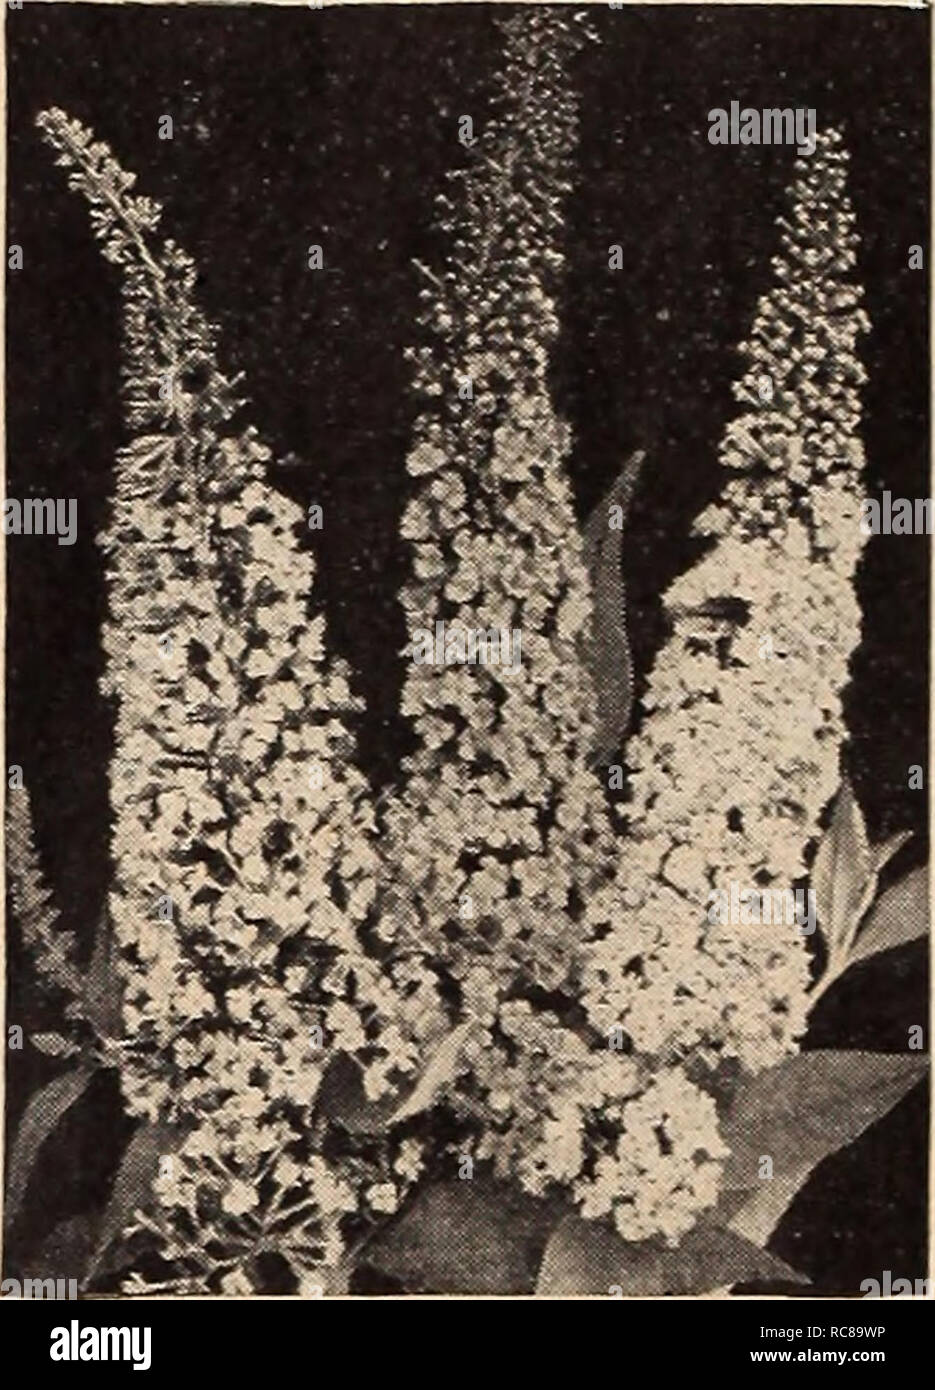 . Dreer's garden book for 1942. Seeds Catalogs; Nursery stock Catalogs; Gardening Equipment and supplies Catalogs; Flowers Seeds Catalogs; Vegetables Seeds Catalogs; Fruit Seeds Catalogs. Abelia chinensis grandiflora Abelia- -Bush Arbutus (M One of the best flowering shrubs for foundation planting in combination with Evergreens and other shrubs. They bloom profusely throughout the summer and are most successful in a sheltered situation or where winters are not too severe. 26-101 Chinensis grandiflora. . compact growing evergreen shrub of medium size producing in summer and fall showy clusters Stock Photo